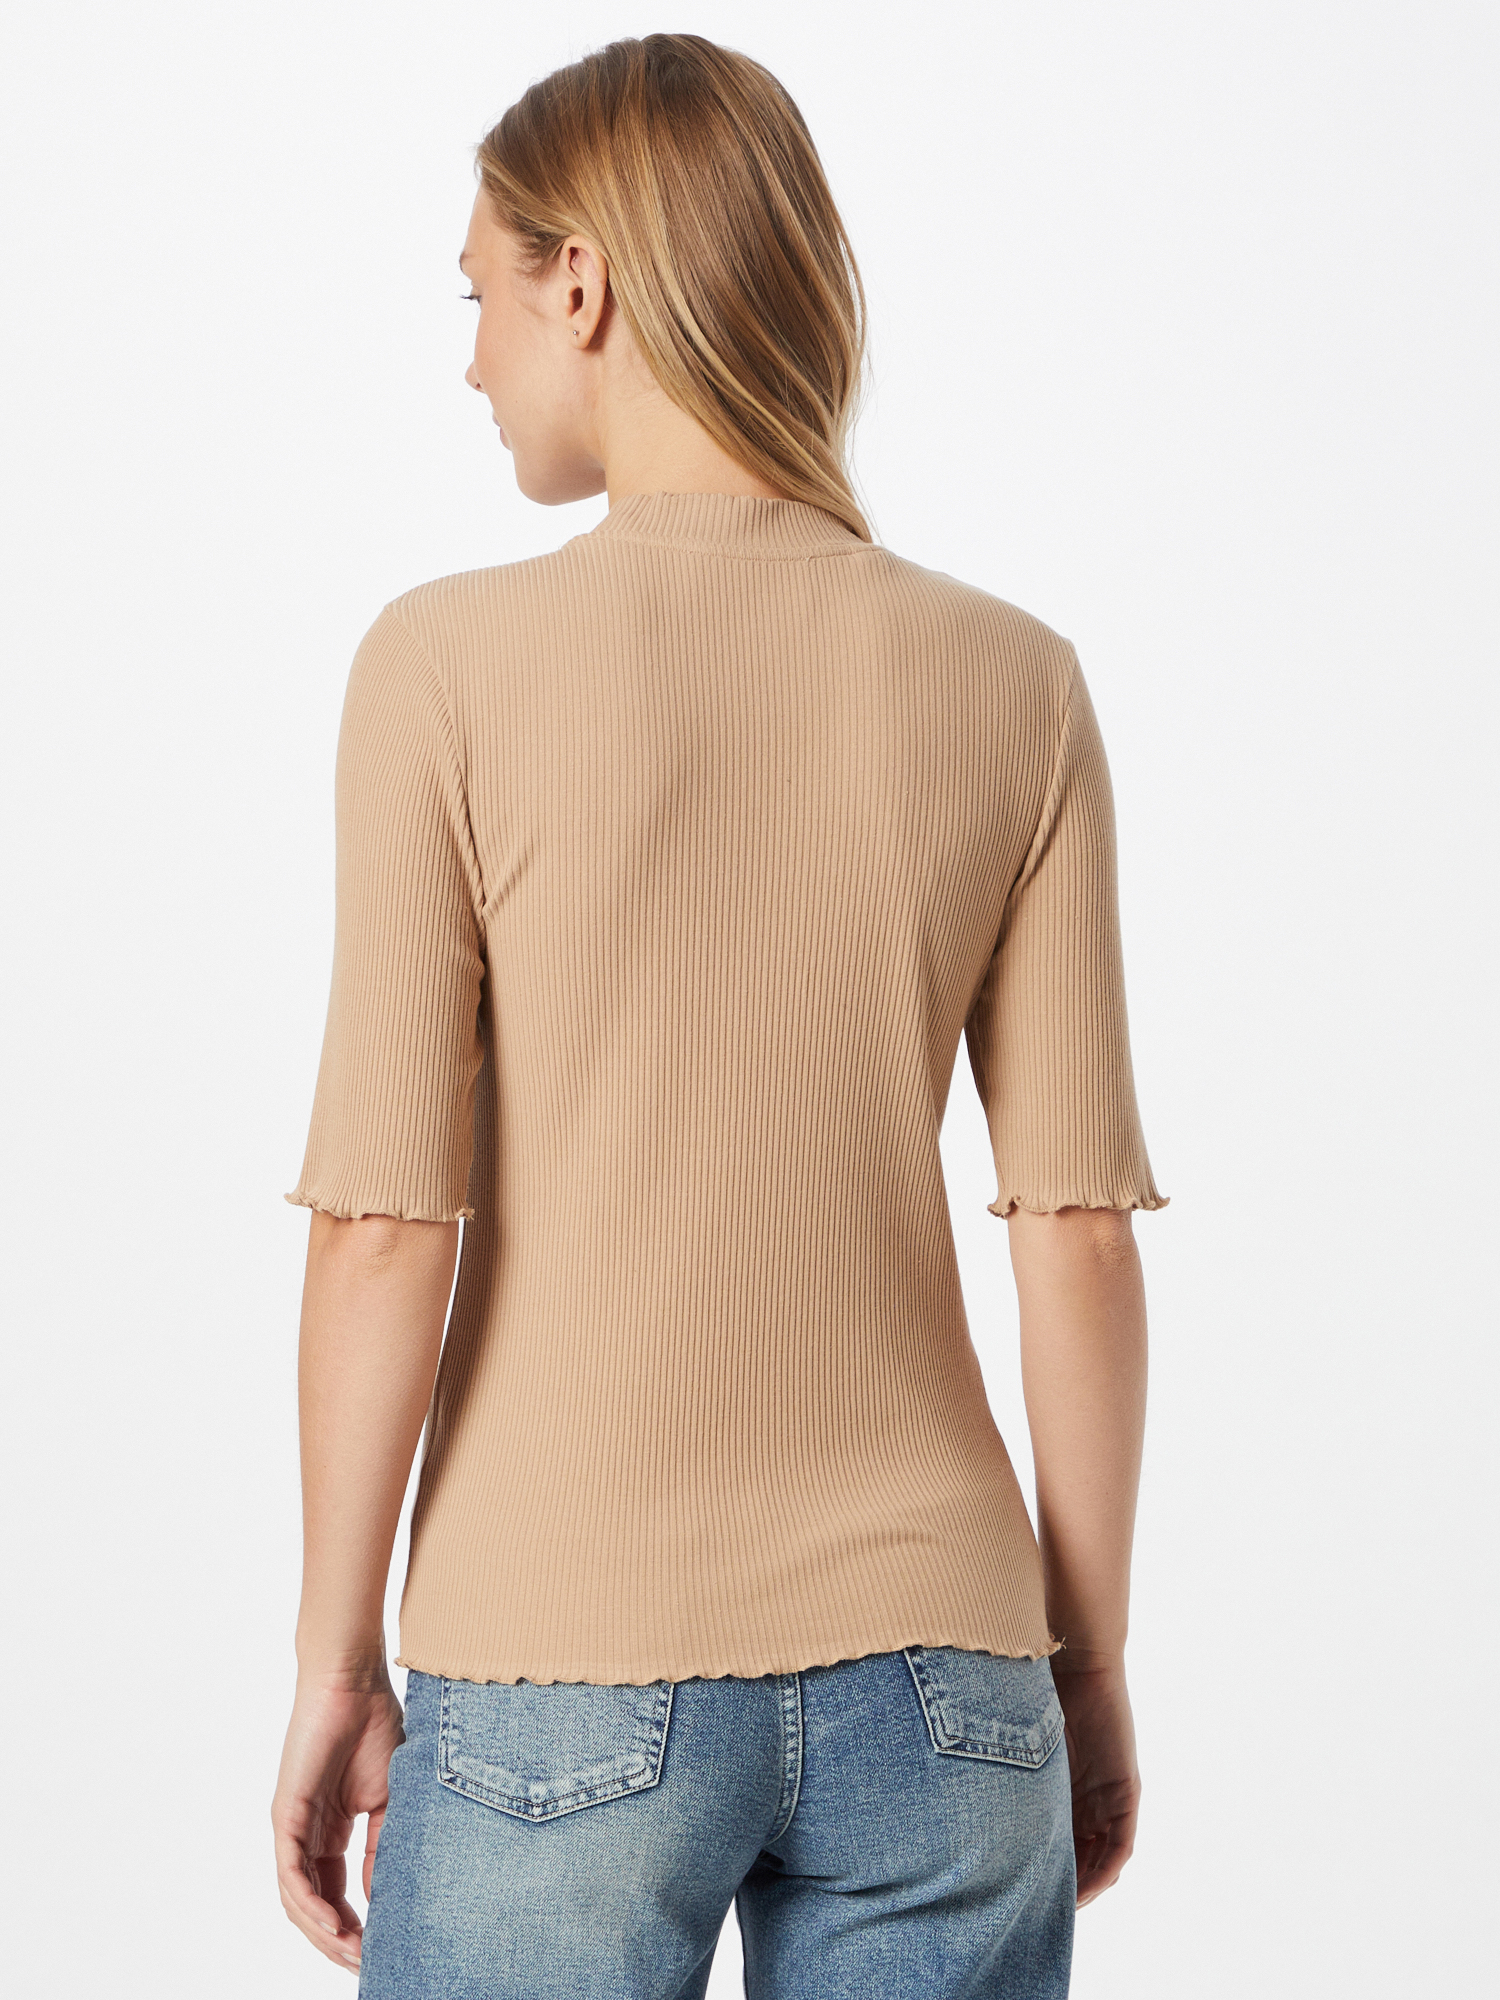 SELECTED FEMME T-Shirt Anna in Camel 